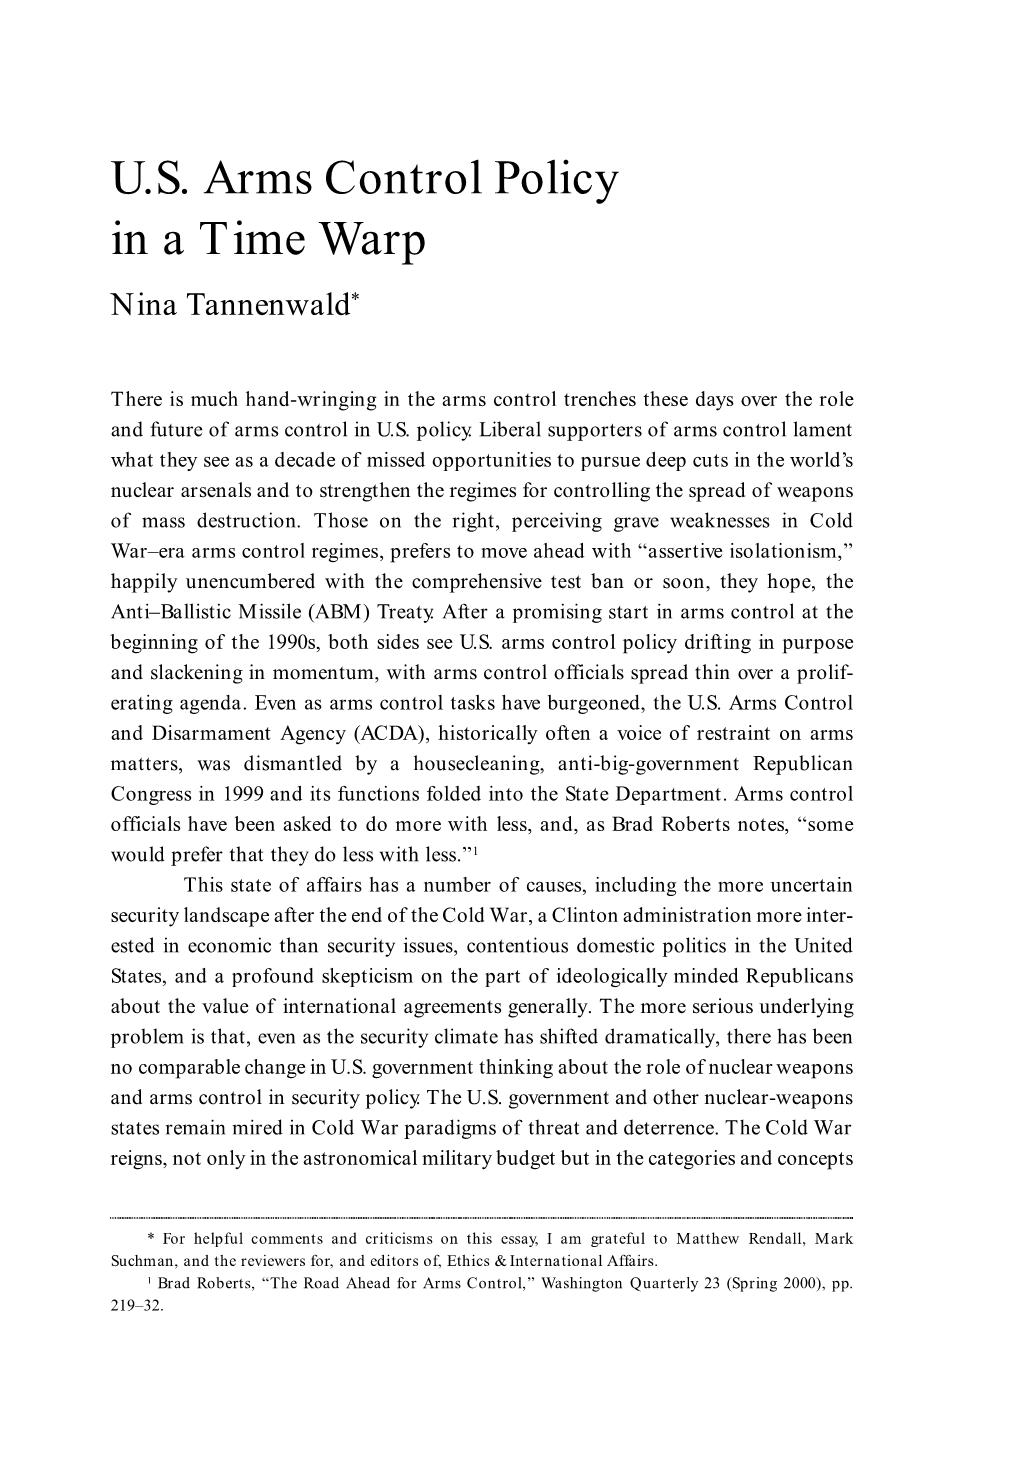 U.S. Arms Control Policy in a Time Warp Nina Tannenwald*